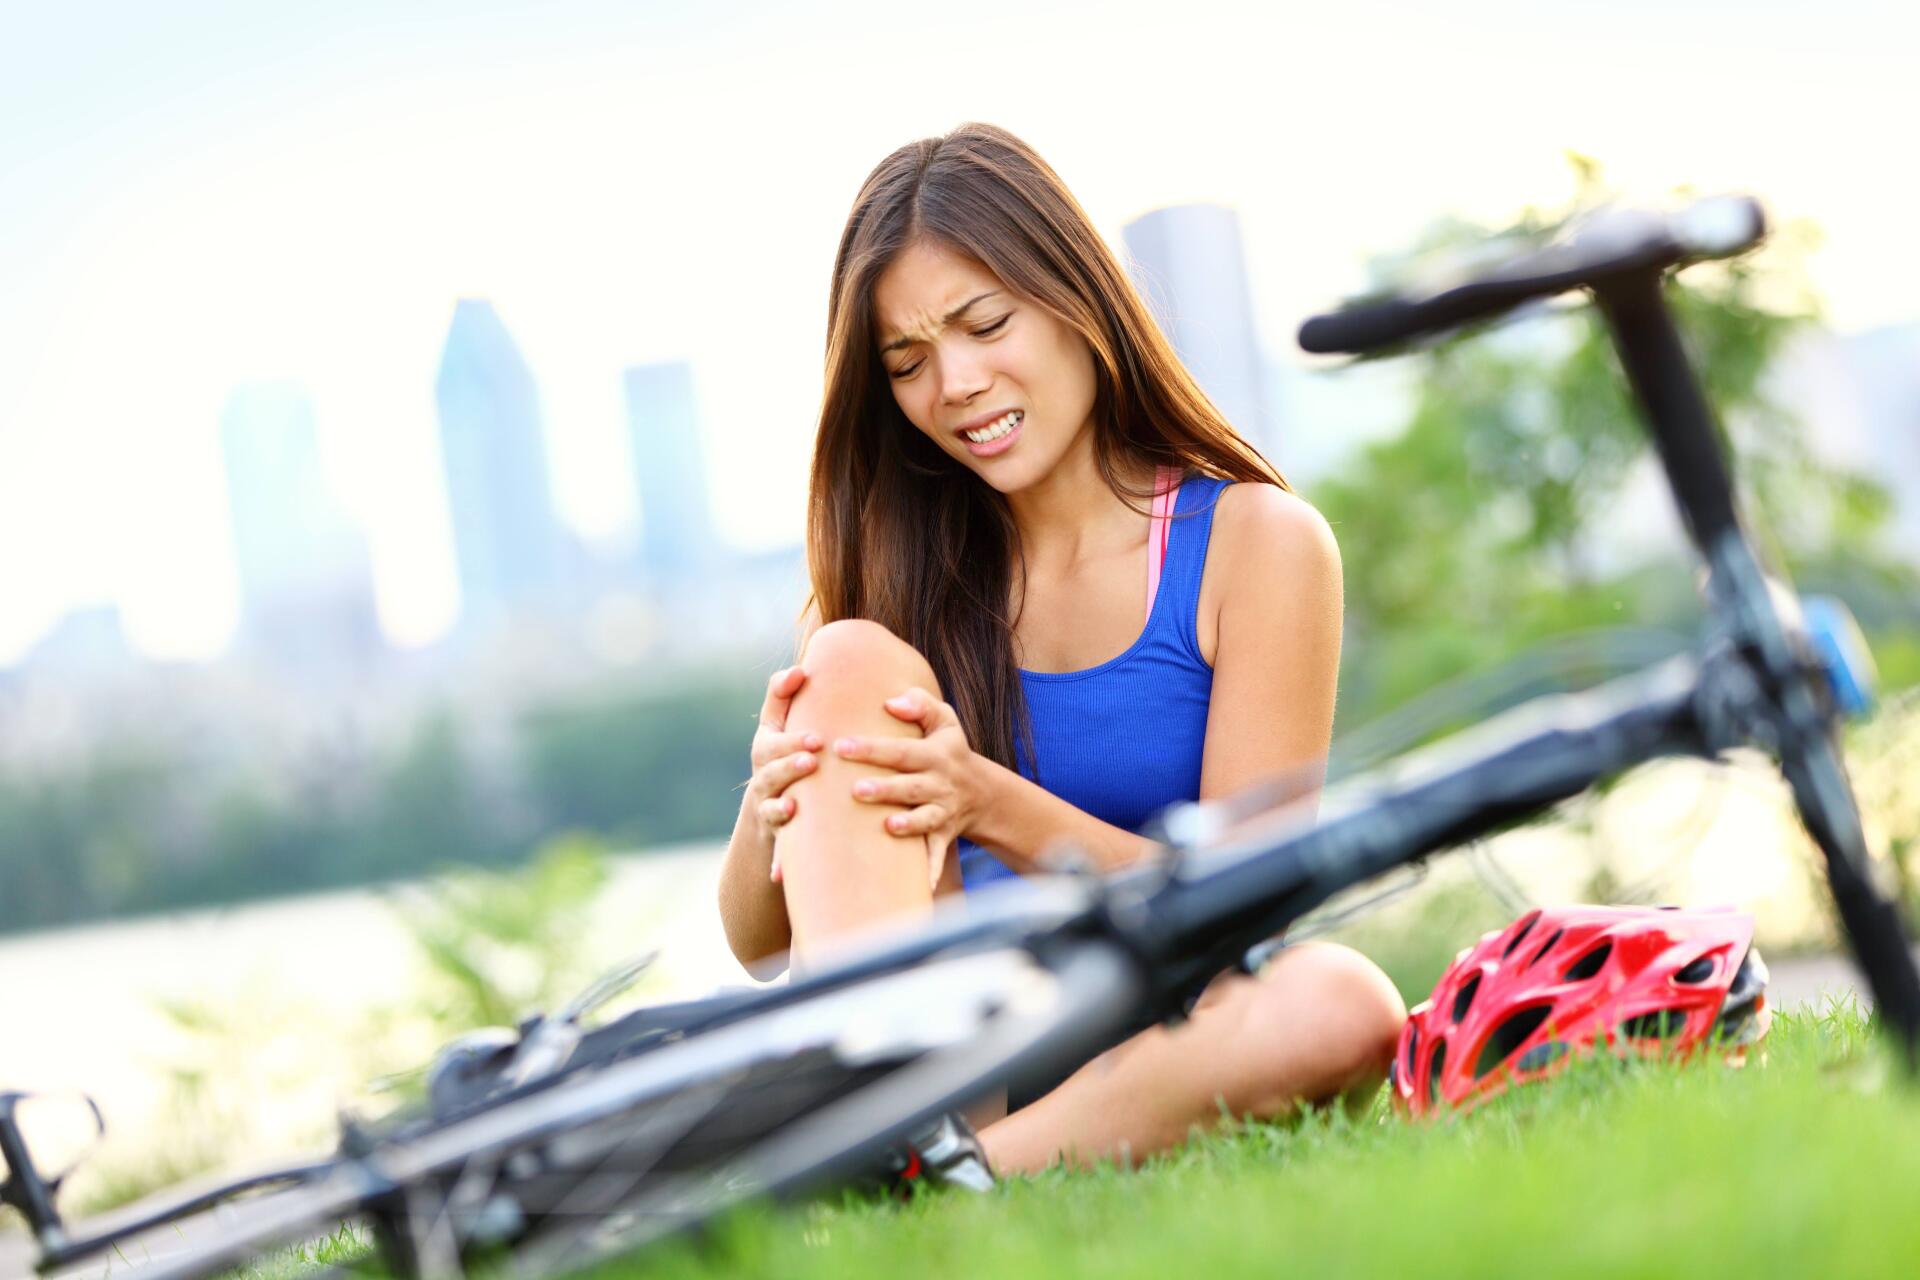 Bicycle Accident – Tampa, FL – Jeeves Law Group